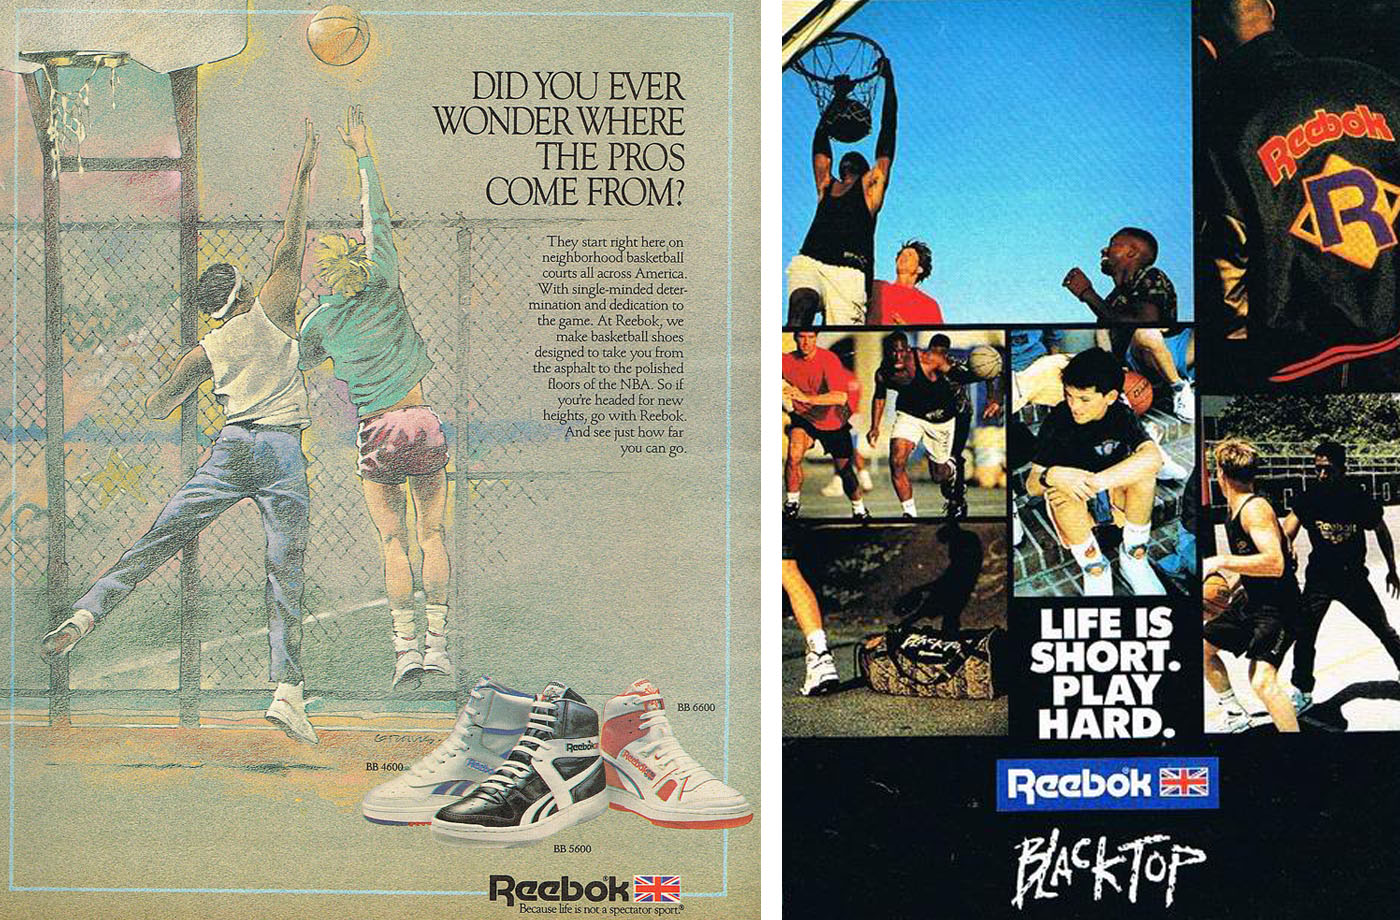 The Importance of Reebok Basketball and Its Roots